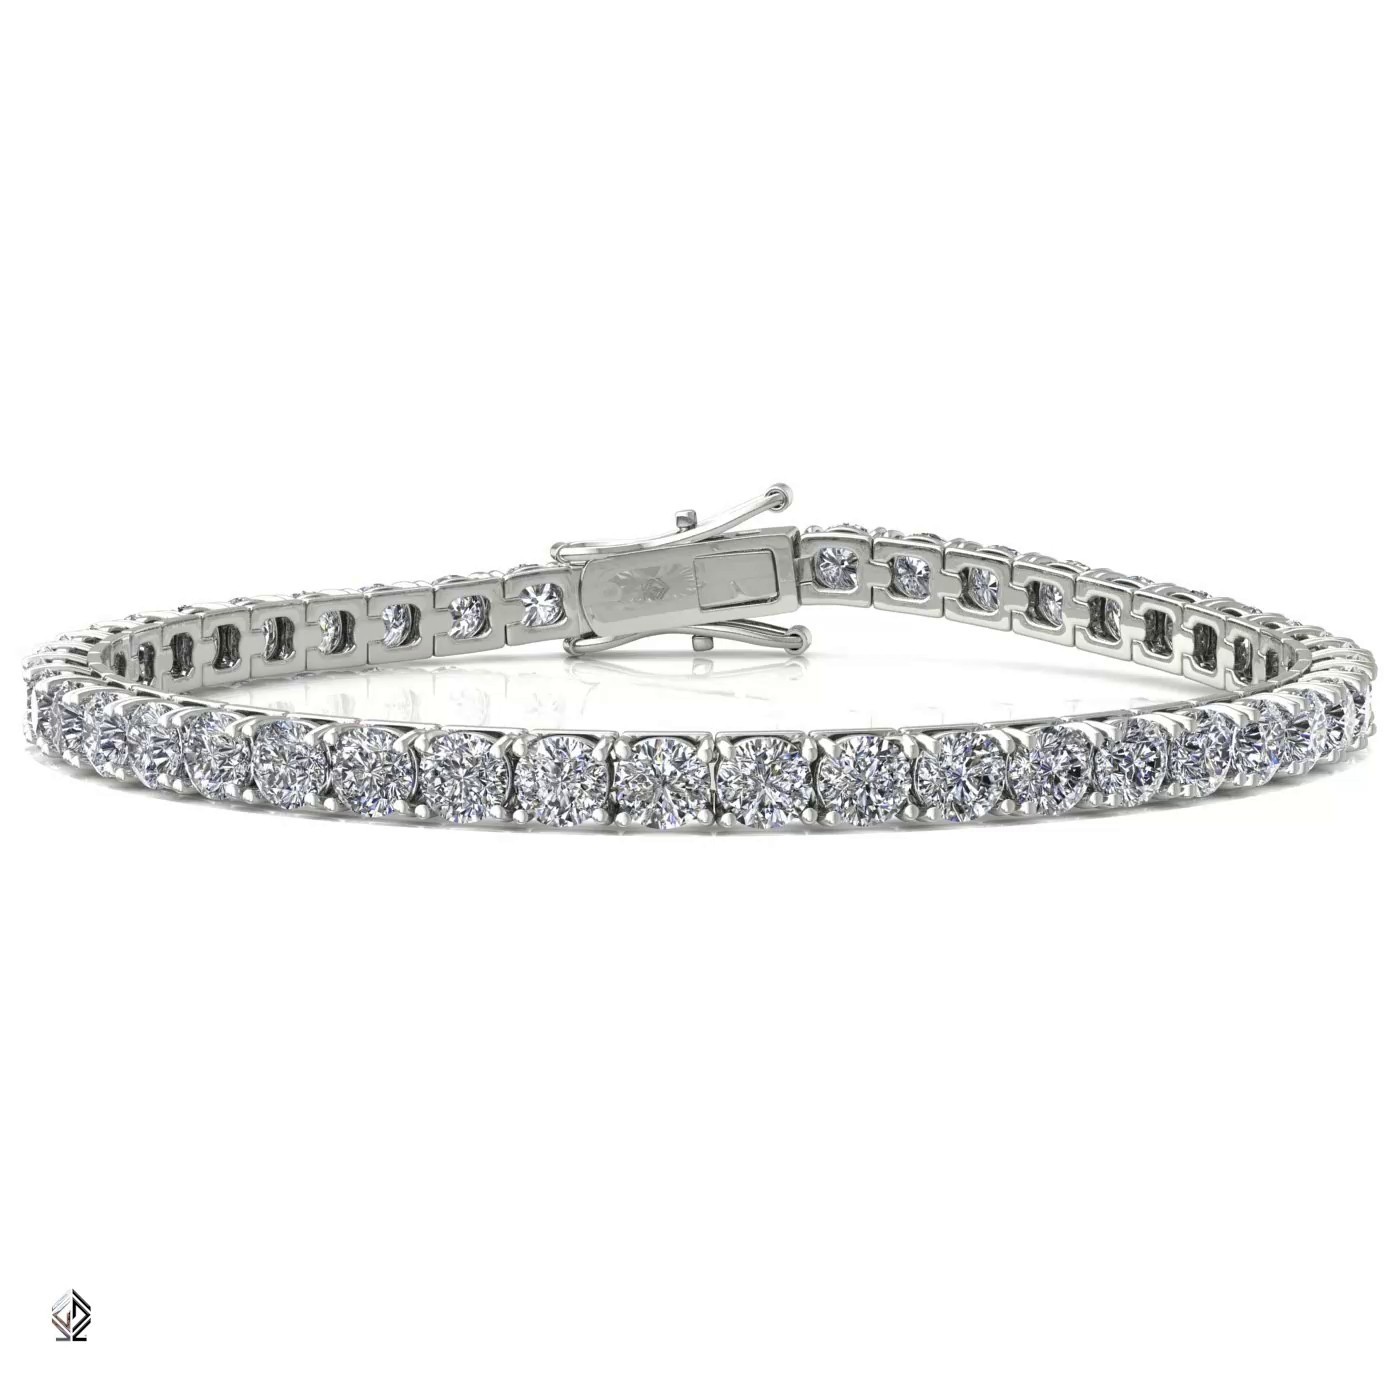 Natural Ruby 925 Sterling Silver Tennis Bracelet, BST-421-RB, 11.424 Gms  (approx.) at Rs 9915/piece in Jaipur